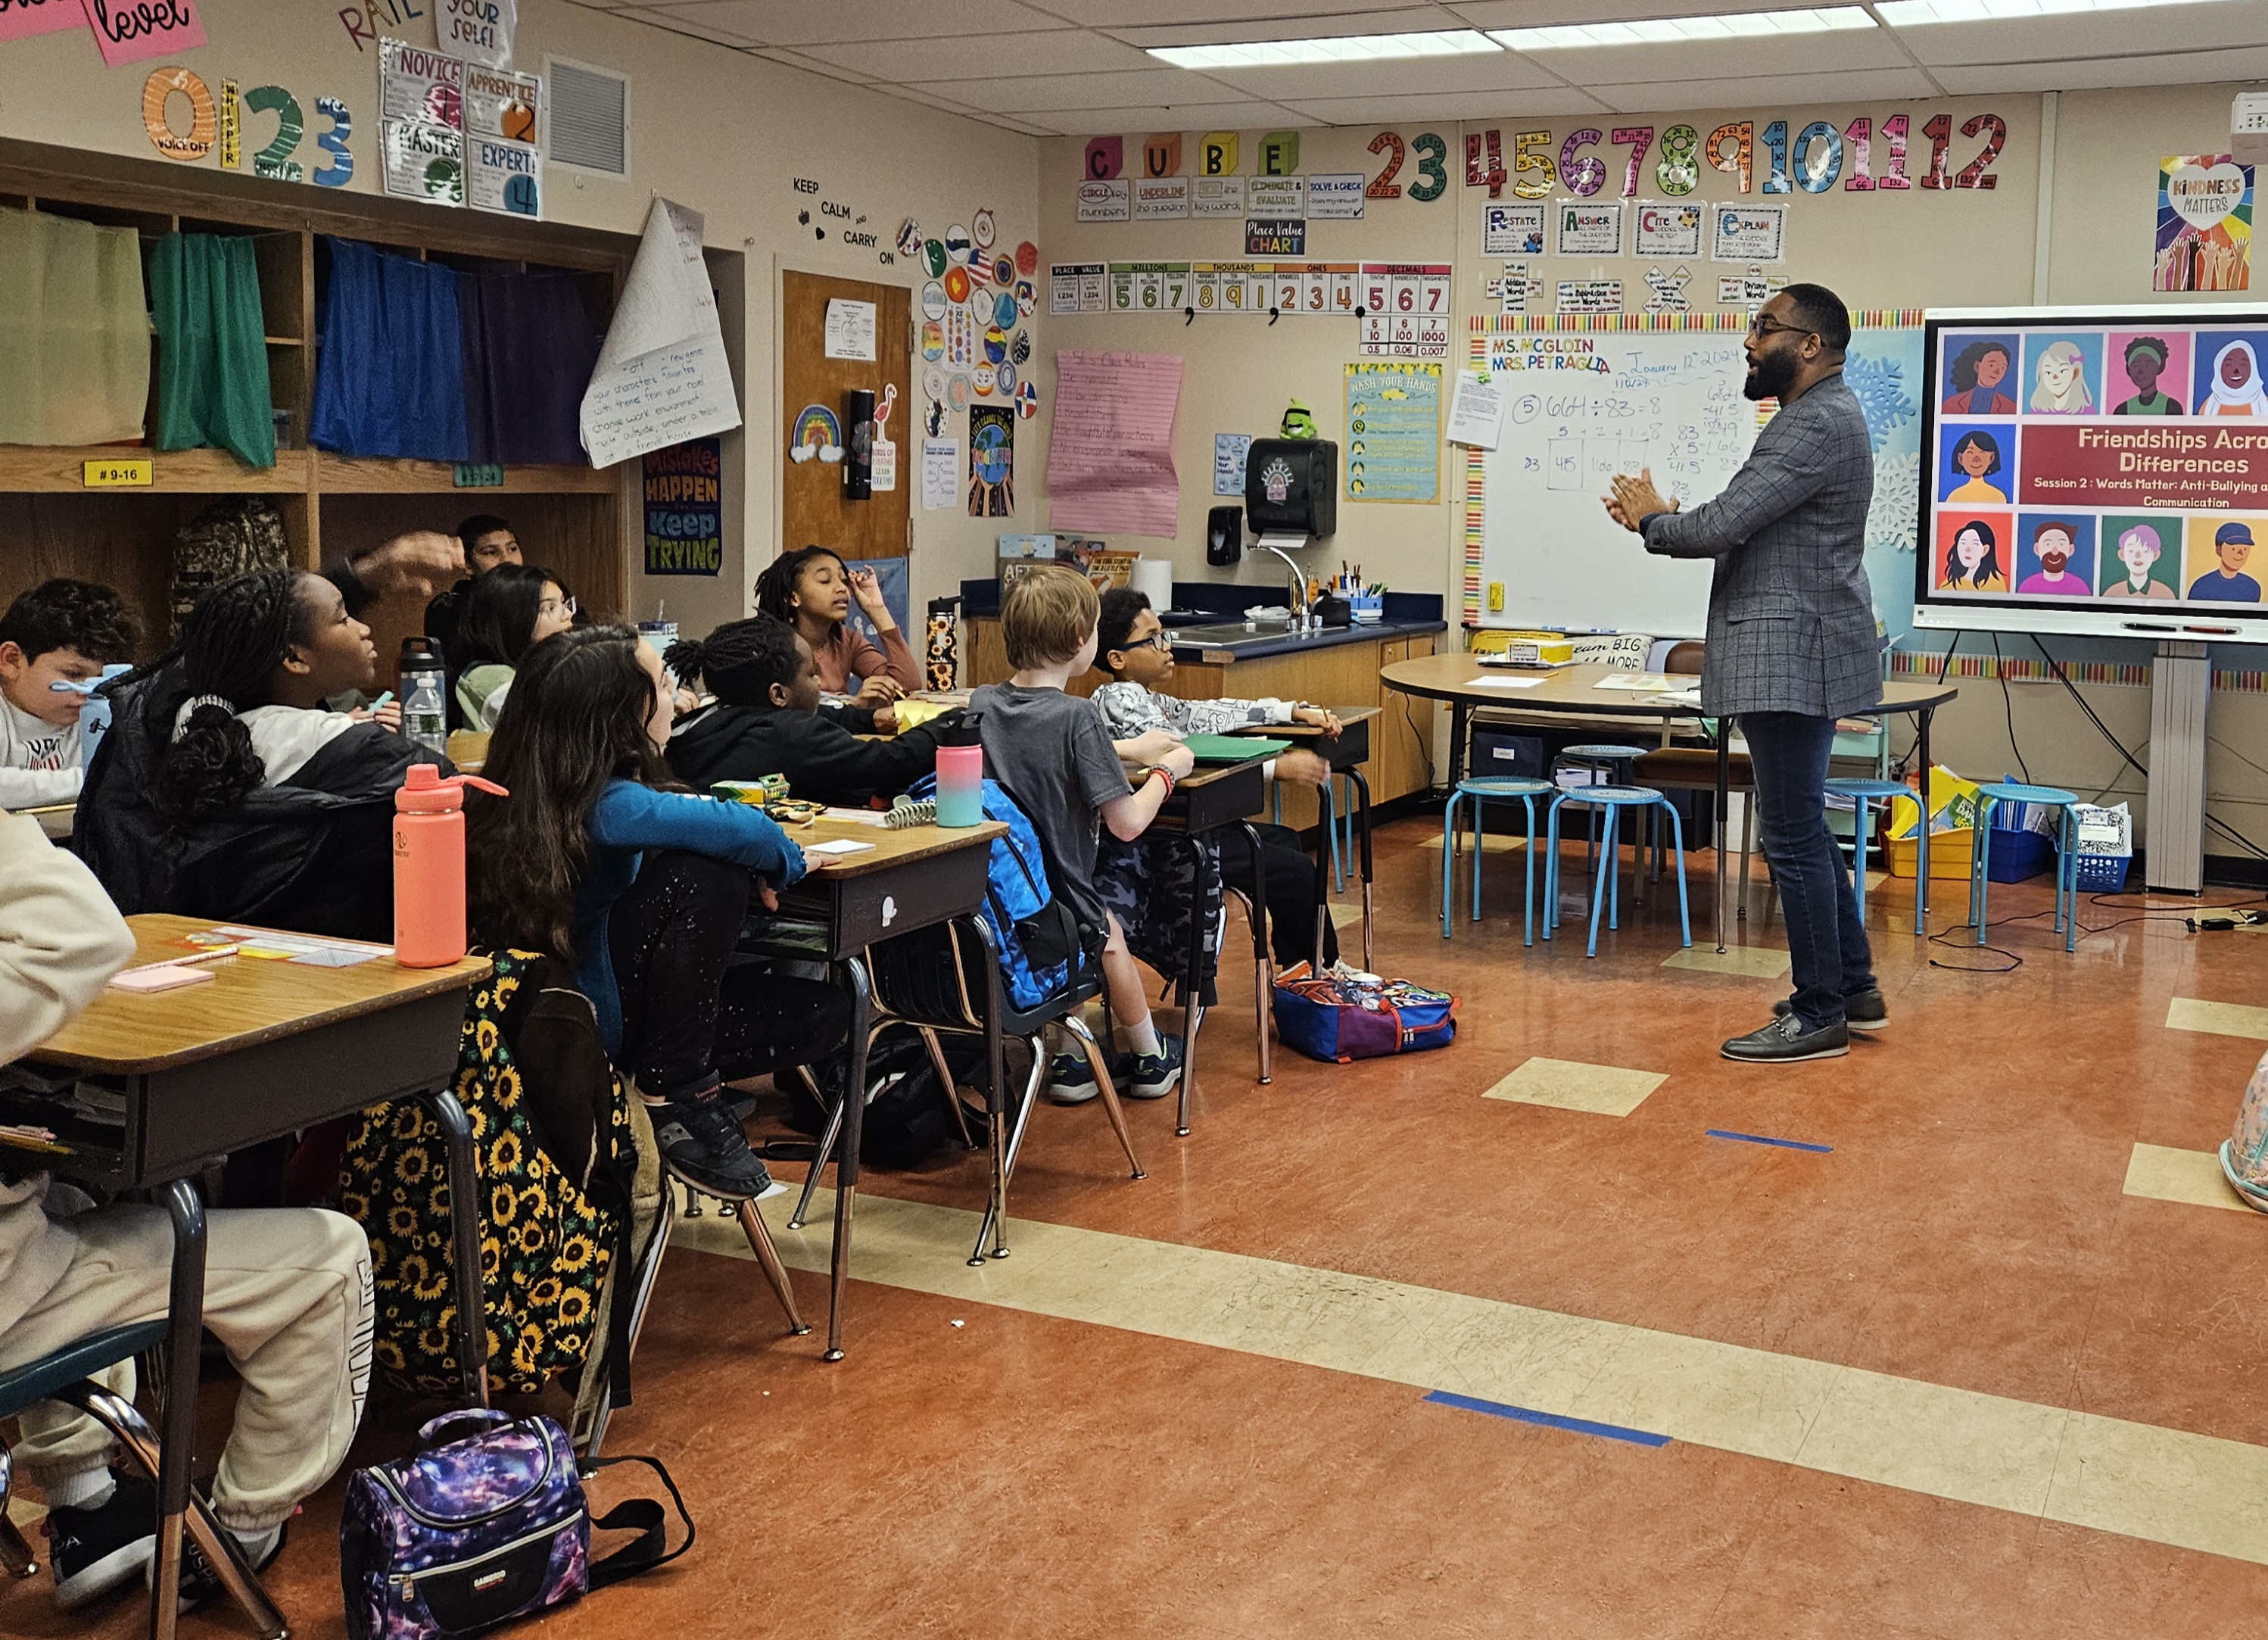 Mr. Daniel McGee came to Belmont to engage 4th and 5th grade students in interactive activities and discussions so they can learn about and celebrate cultural differences. 